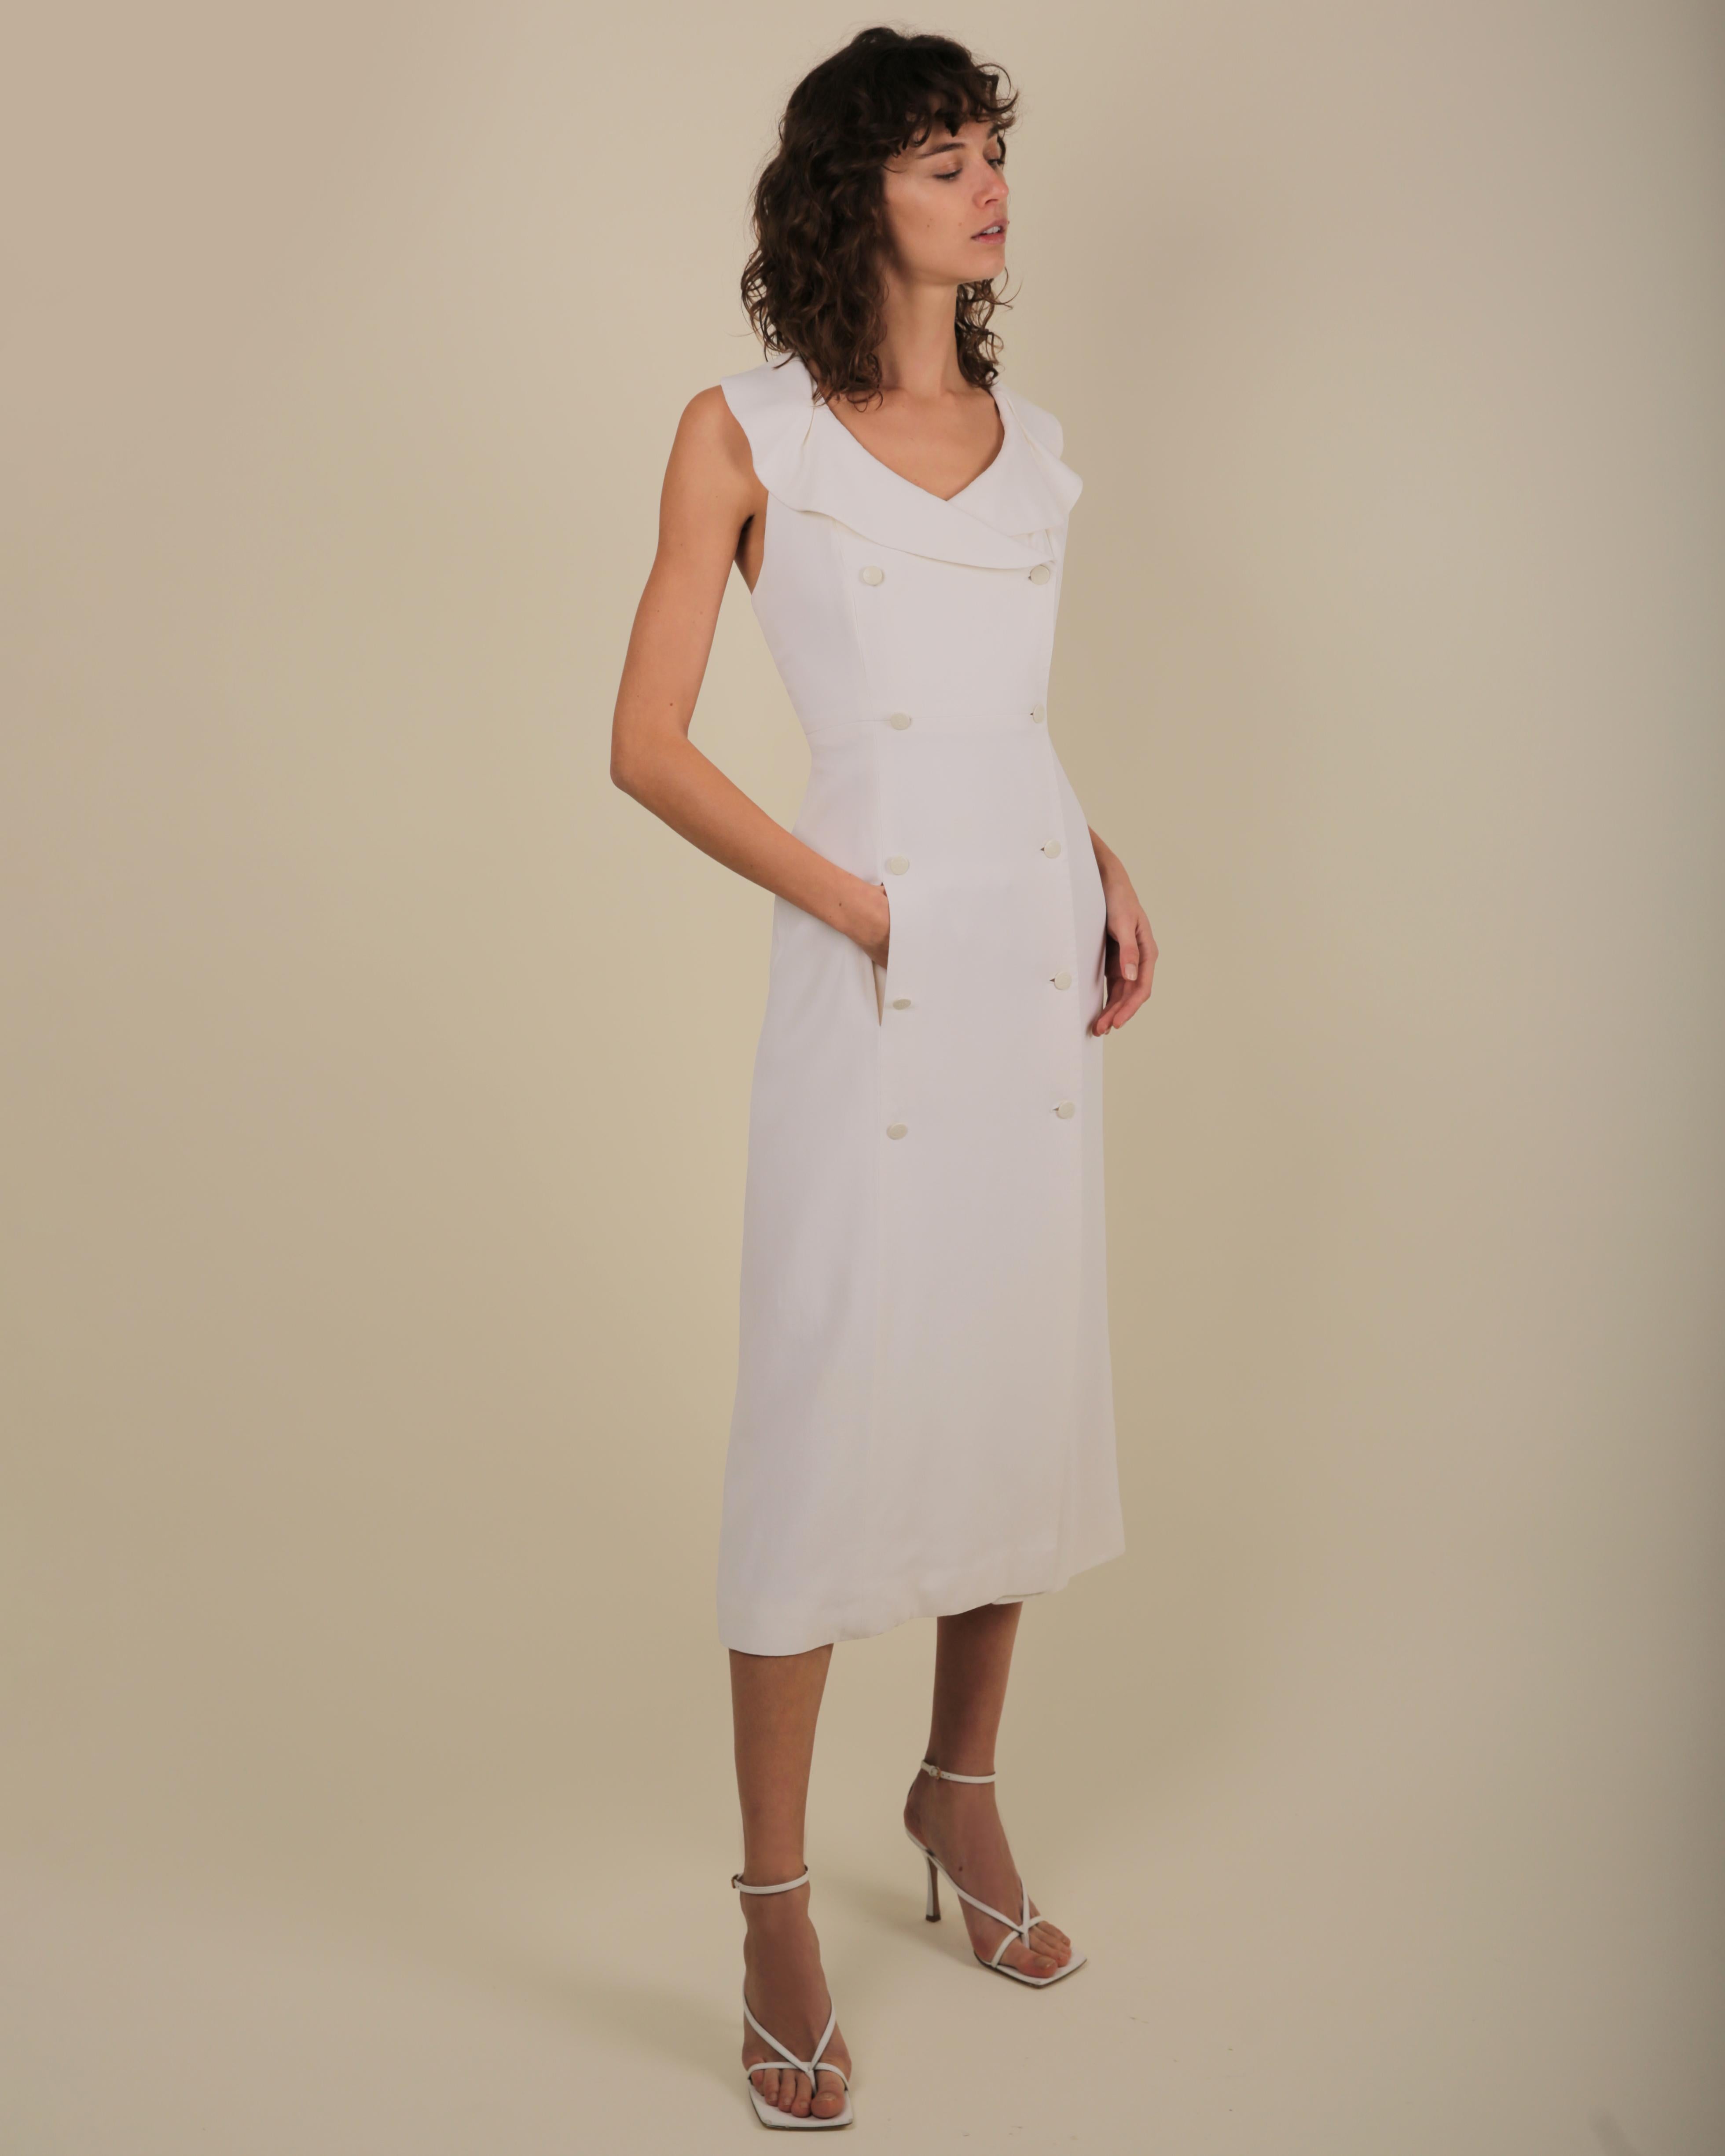 Chanel cruise 1997 vintage white wedding midi dress with logo button up front   For Sale 2